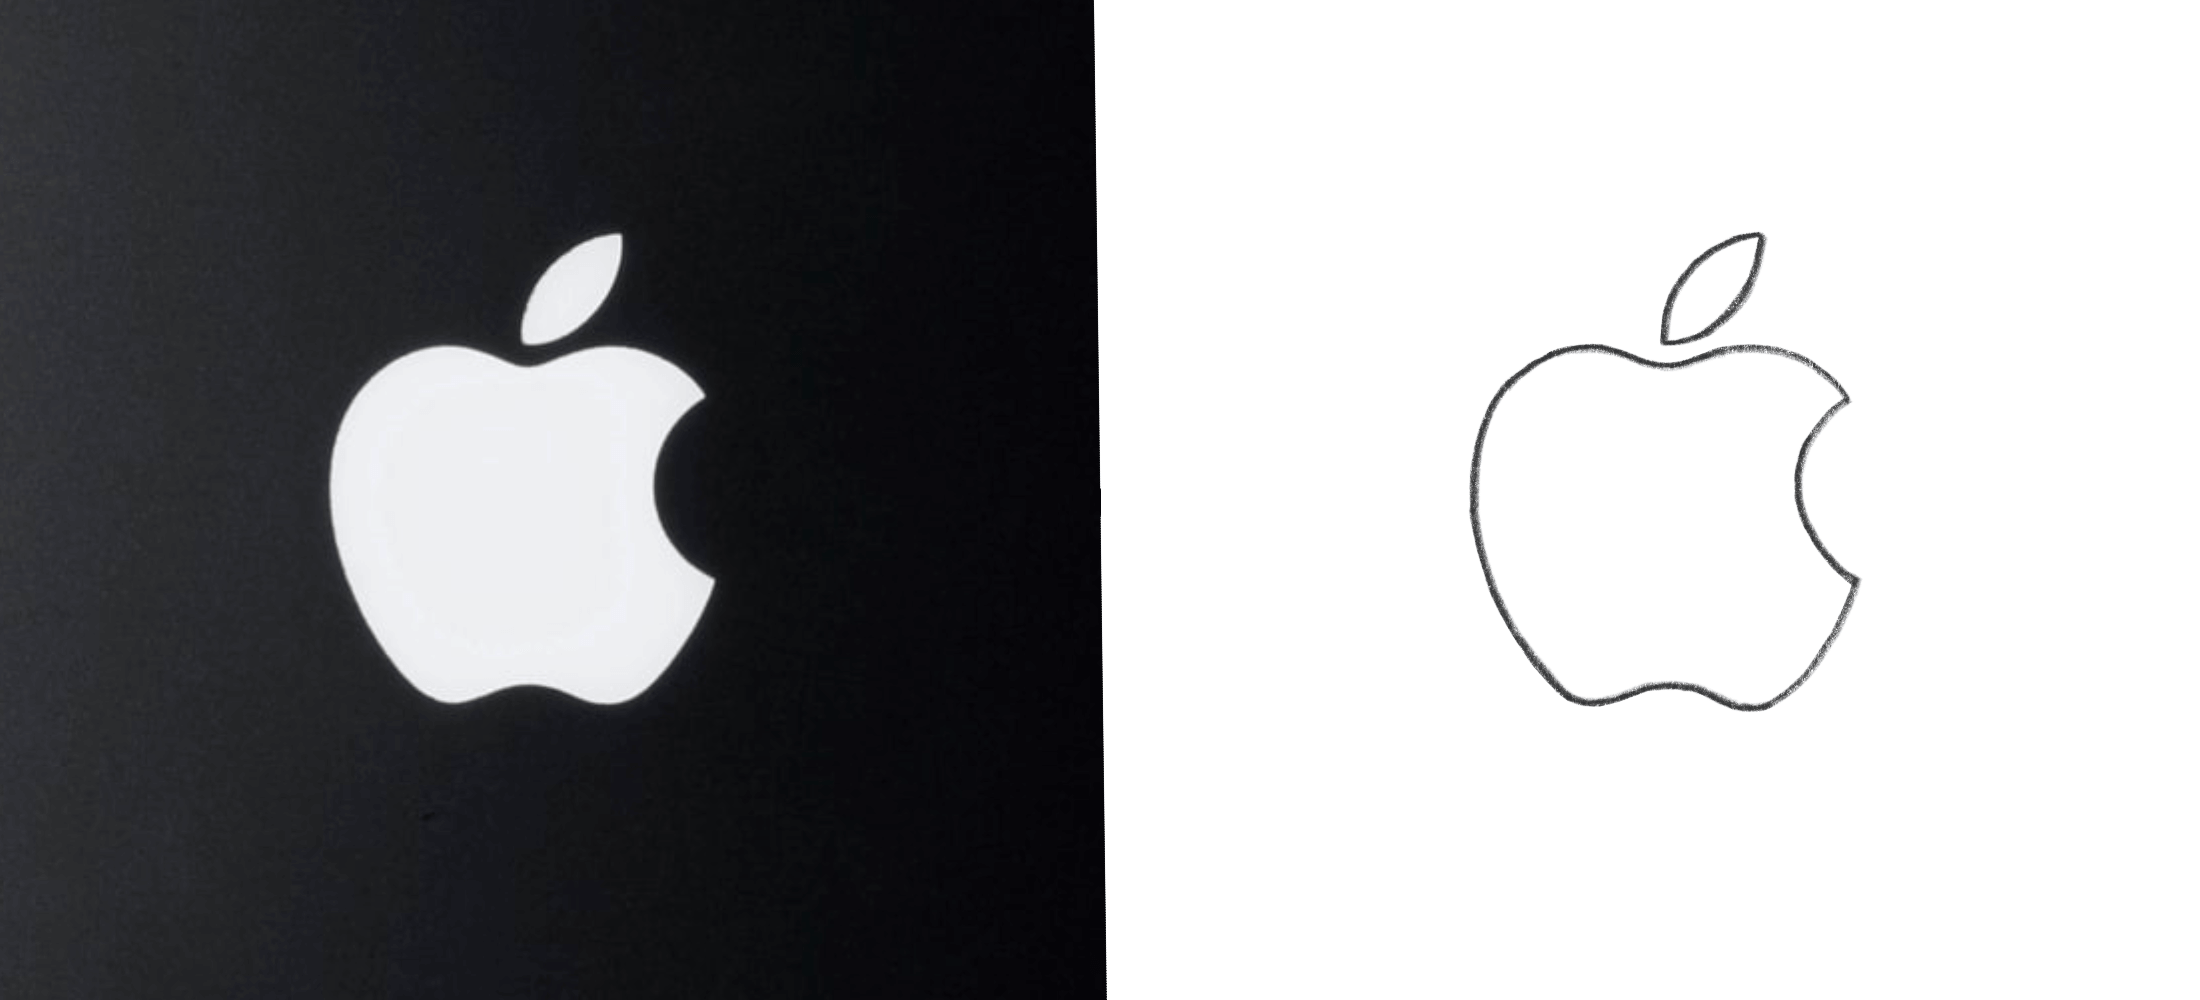 The Apple logo on a Macbook in a dark room alongside a drawn version of the Apple logo